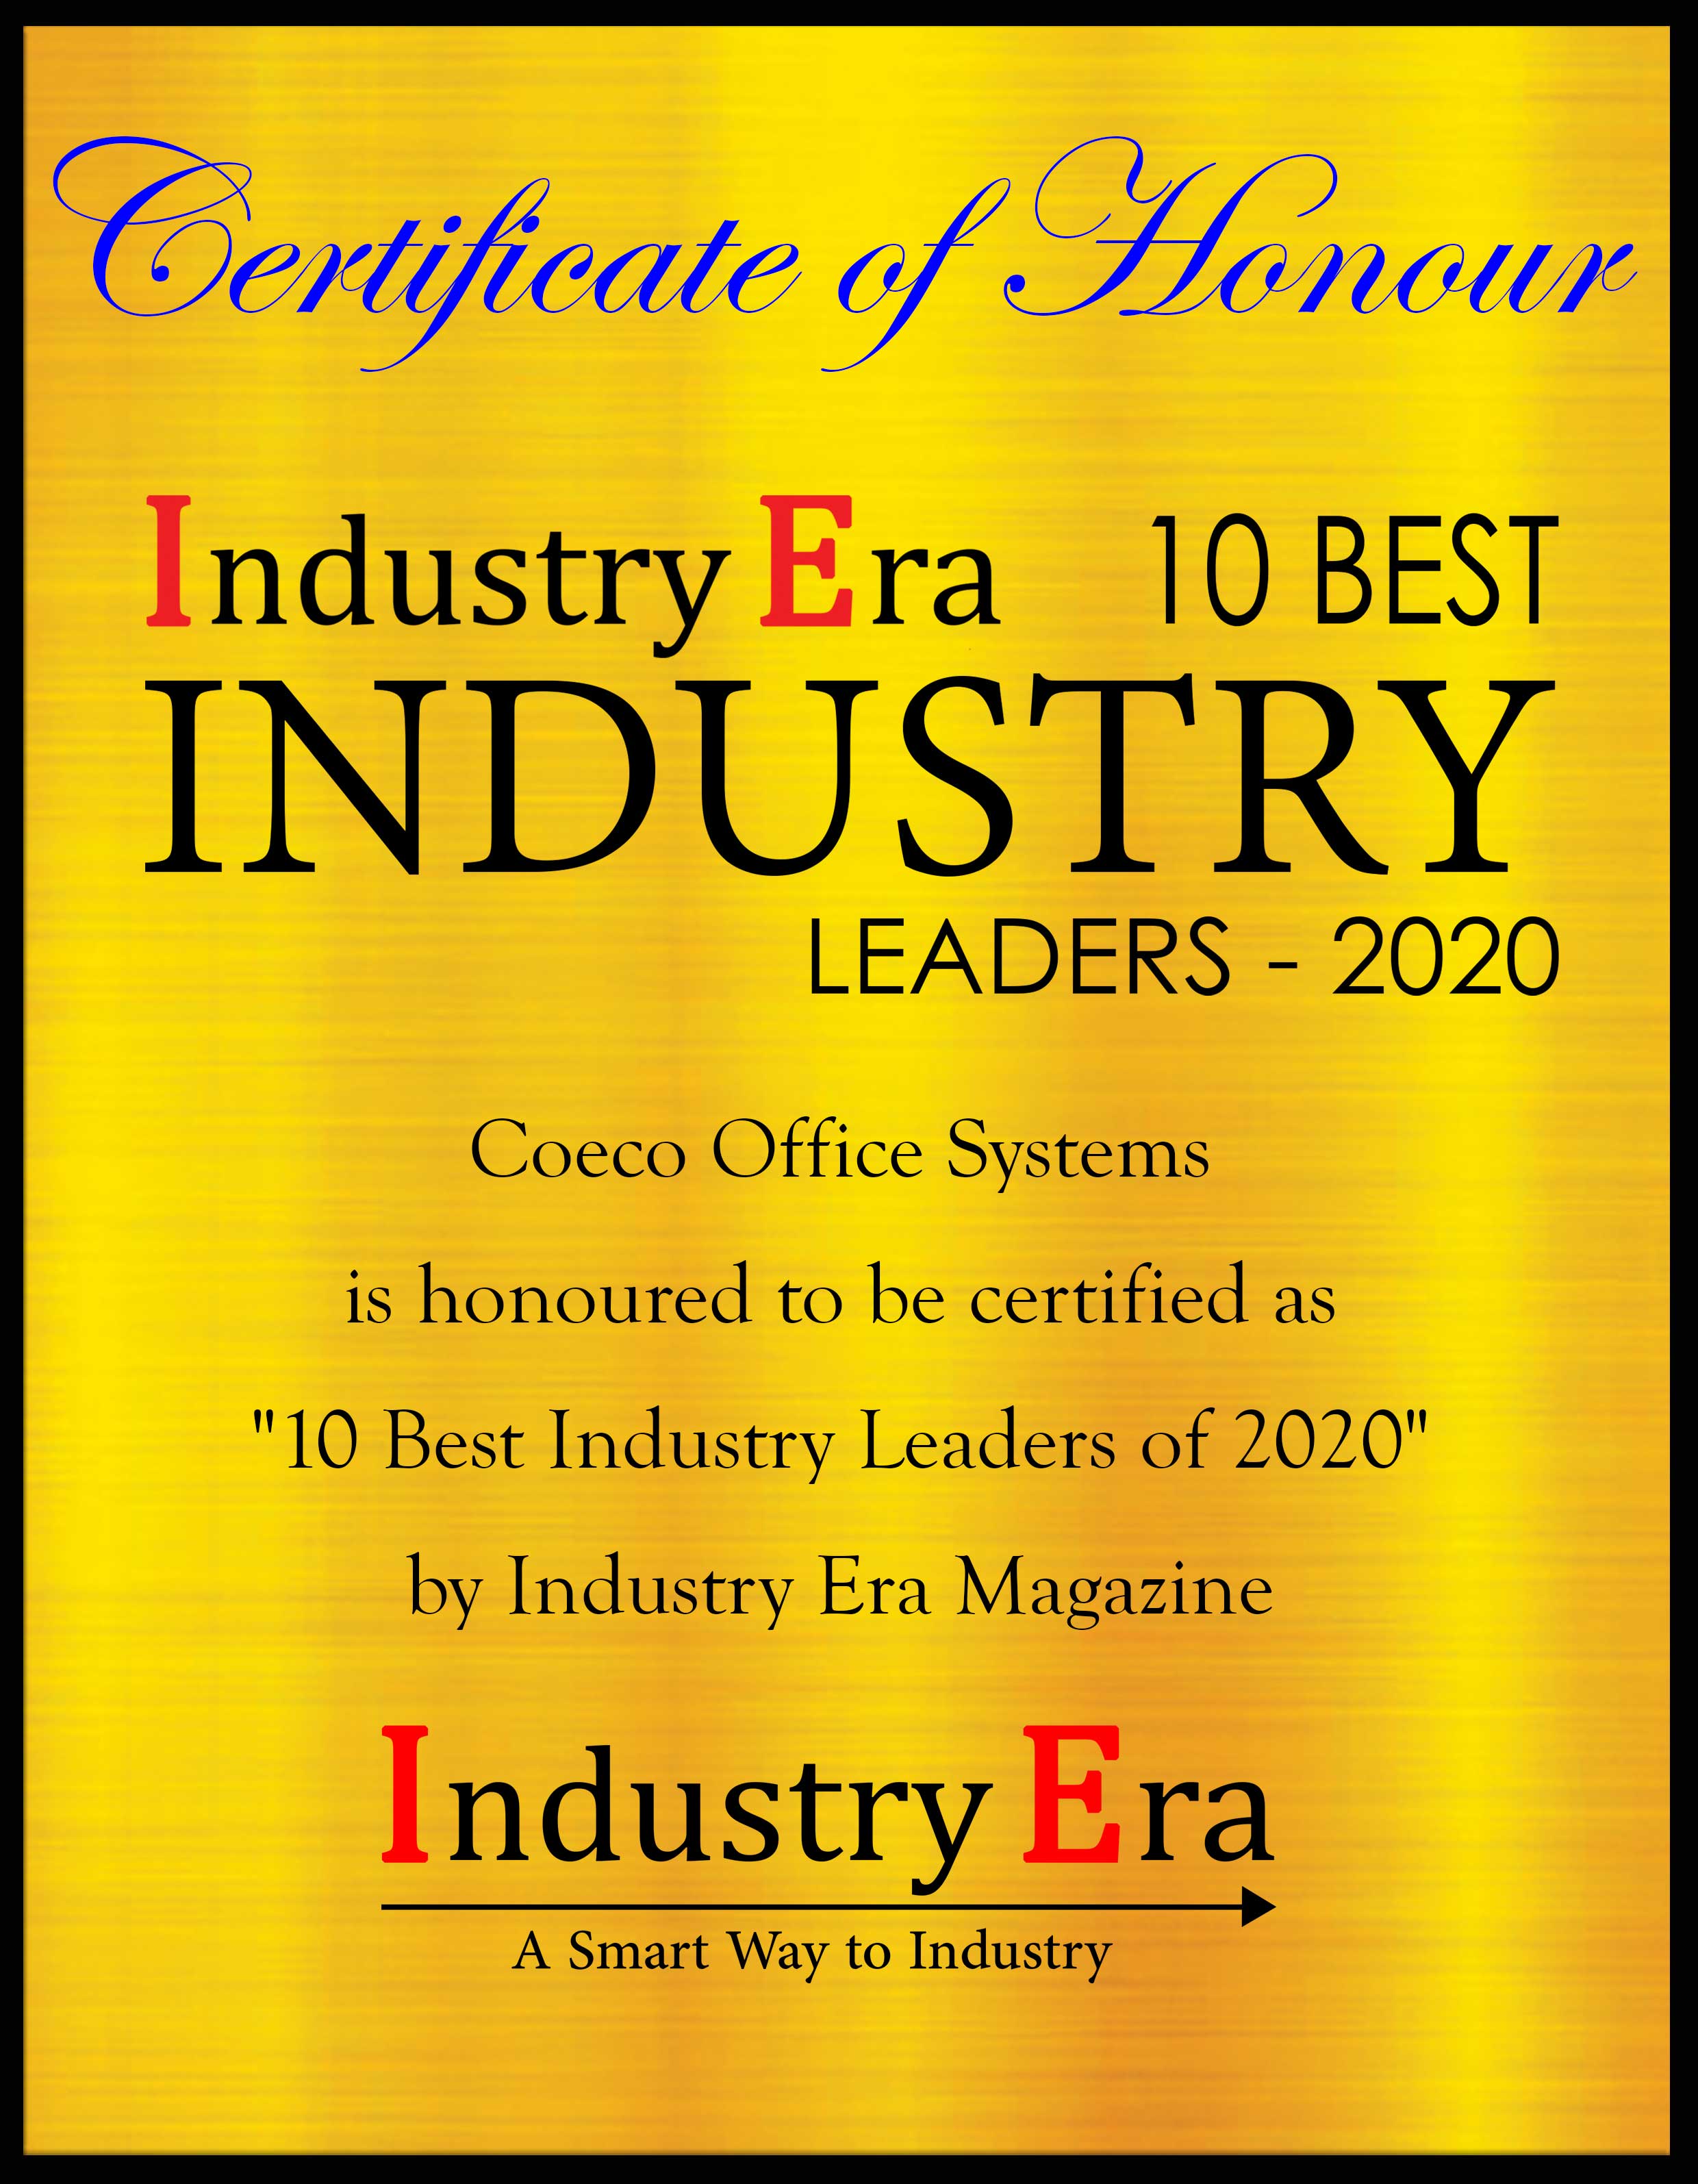 Chuck Robbins, CEO of Coeco Office Systems Certificate